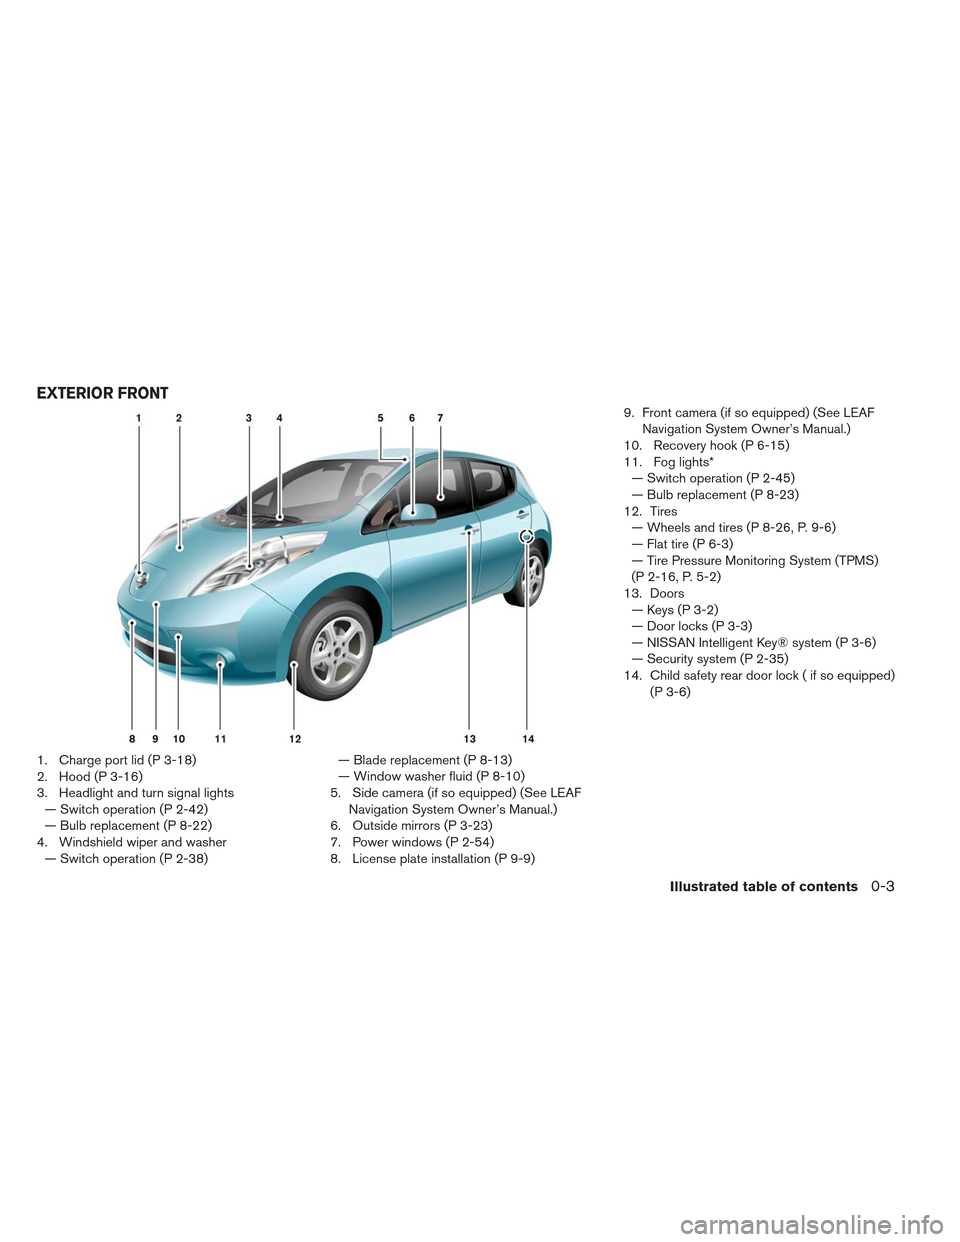 NISSAN LEAF 2013 1.G Owners Manual 1. Charge port lid (P 3-18)
2. Hood (P 3-16)
3. Headlight and turn signal lights— Switch operation (P 2-42)
— Bulb replacement (P 8-22)
4. Windshield wiper and washer — Switch operation (P 2-38)